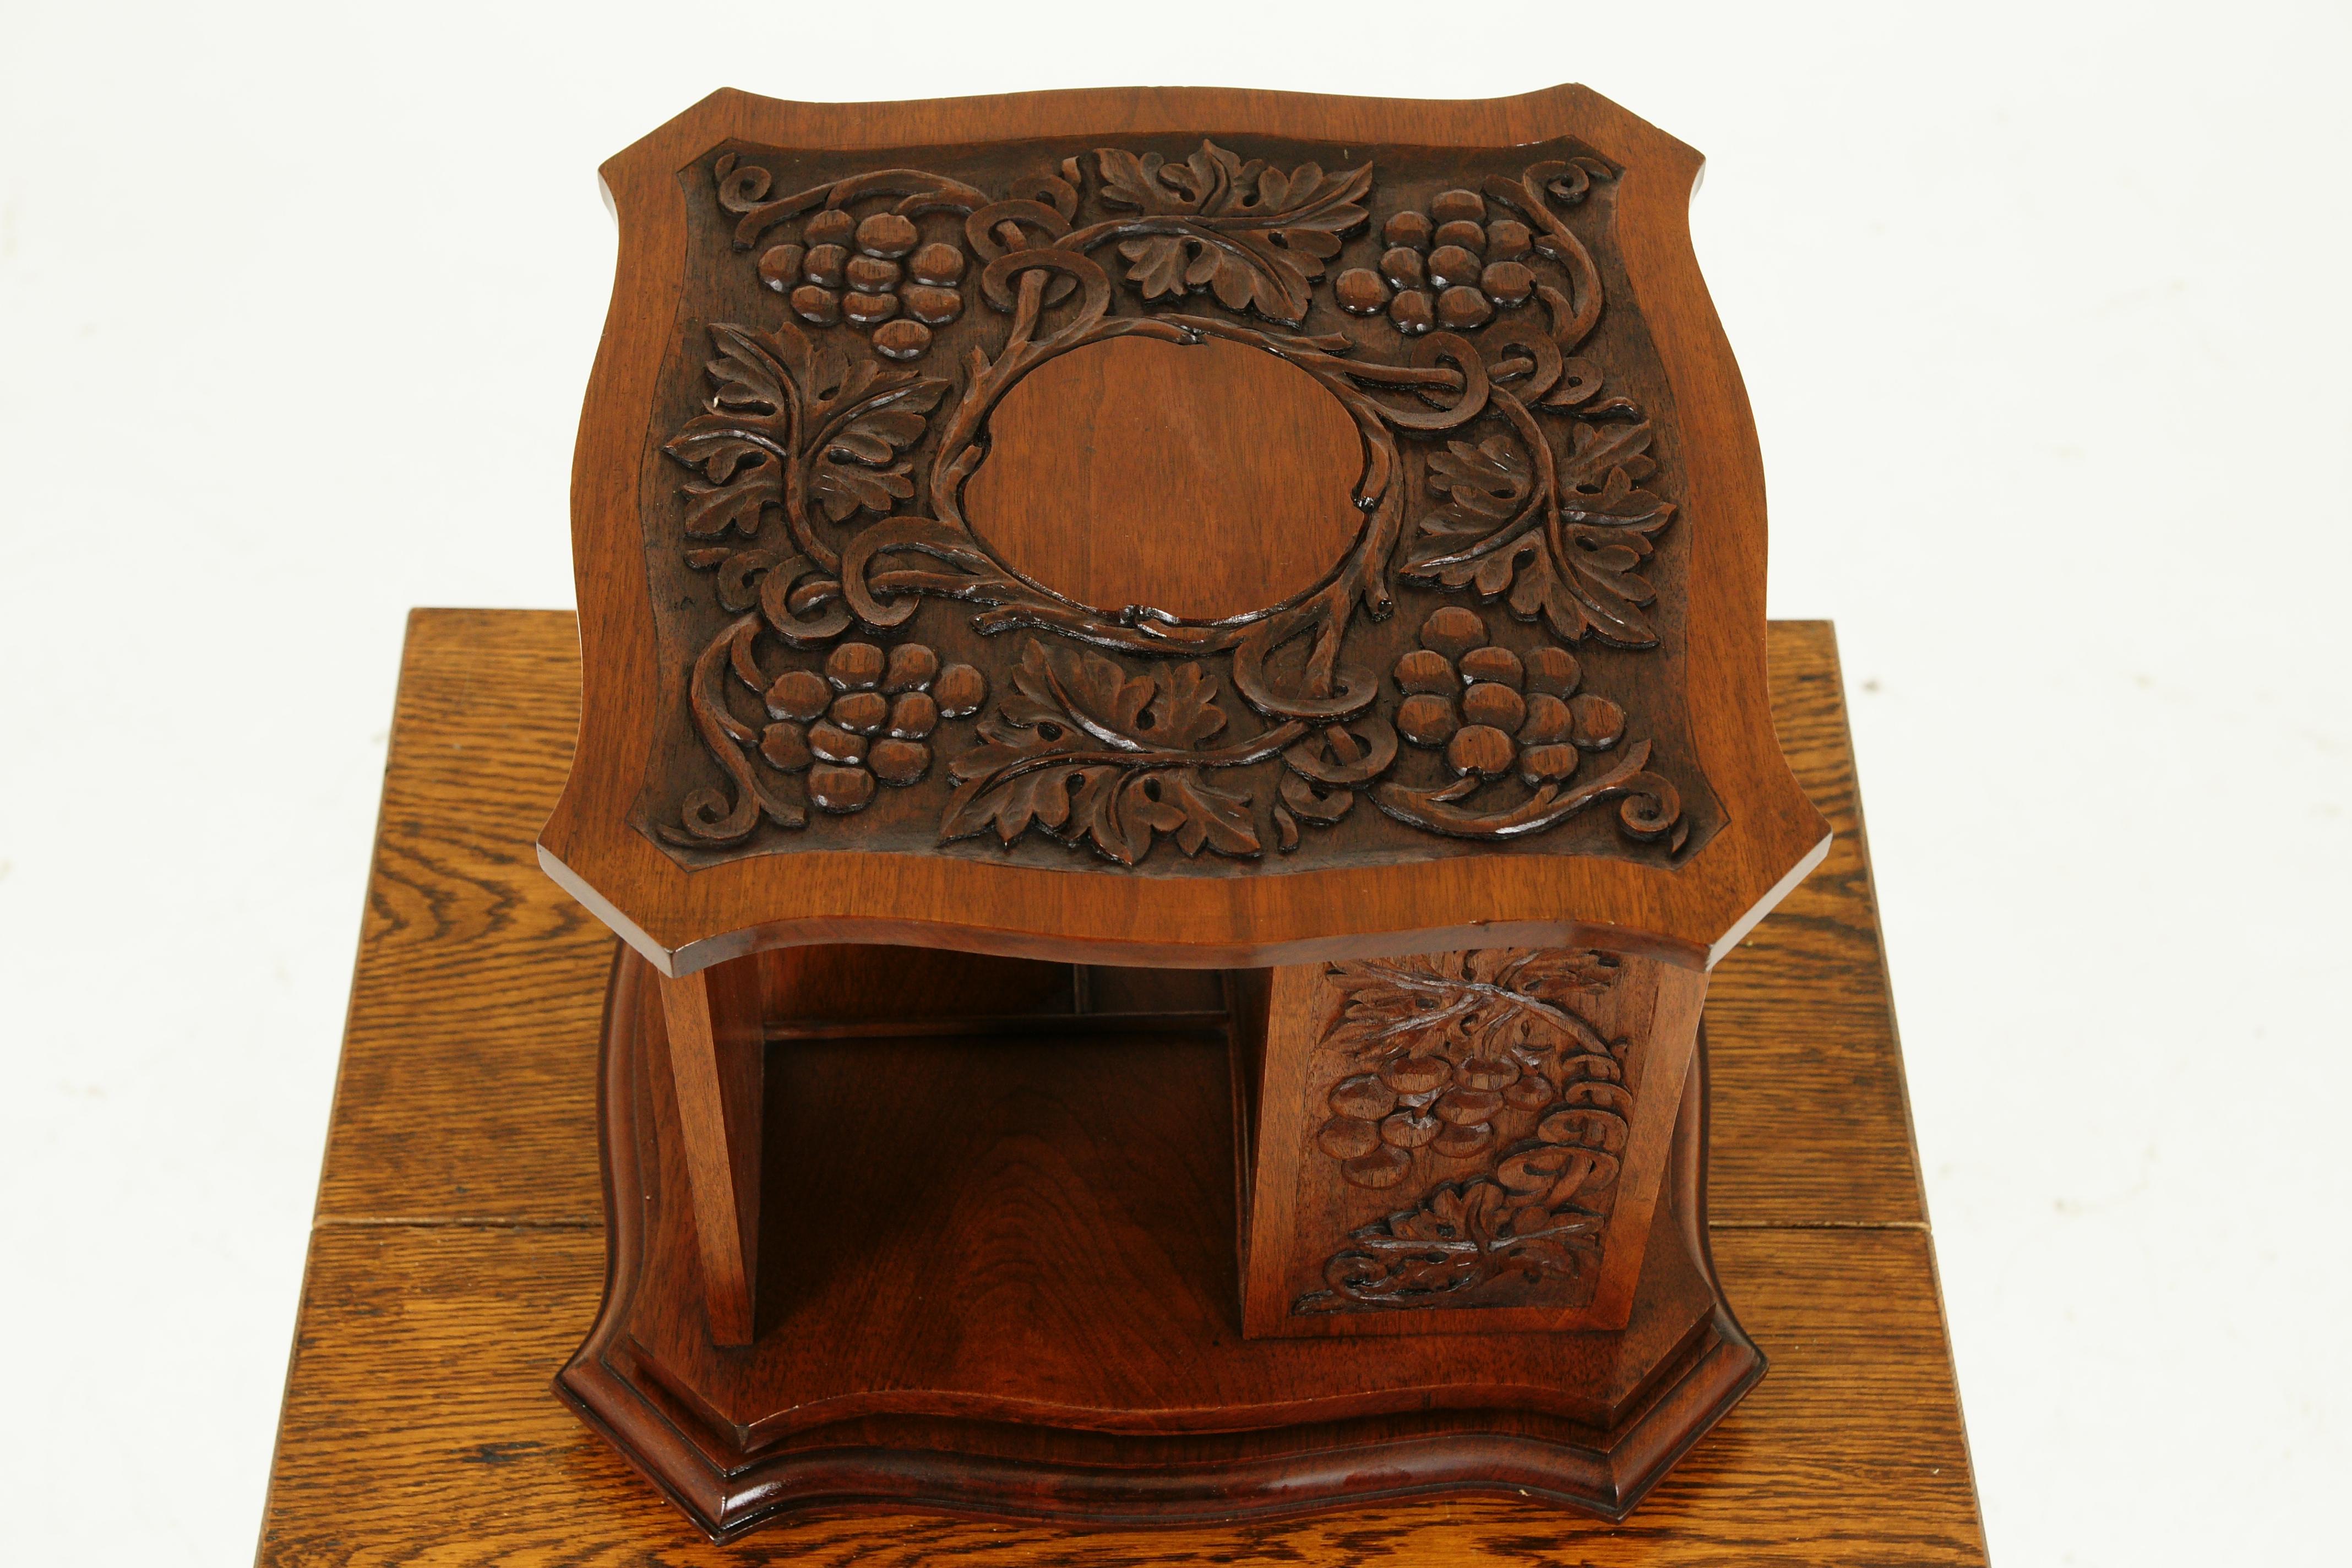 Antique revolving bookcase, Arts + Crafts, carved walnut tabletop bookcase, Scotland 1910, B2545

Scotland 1910
Solid walnut
Original finish
With attractive top with carved grapes and leaves
With carved panels to the four sides
With four book